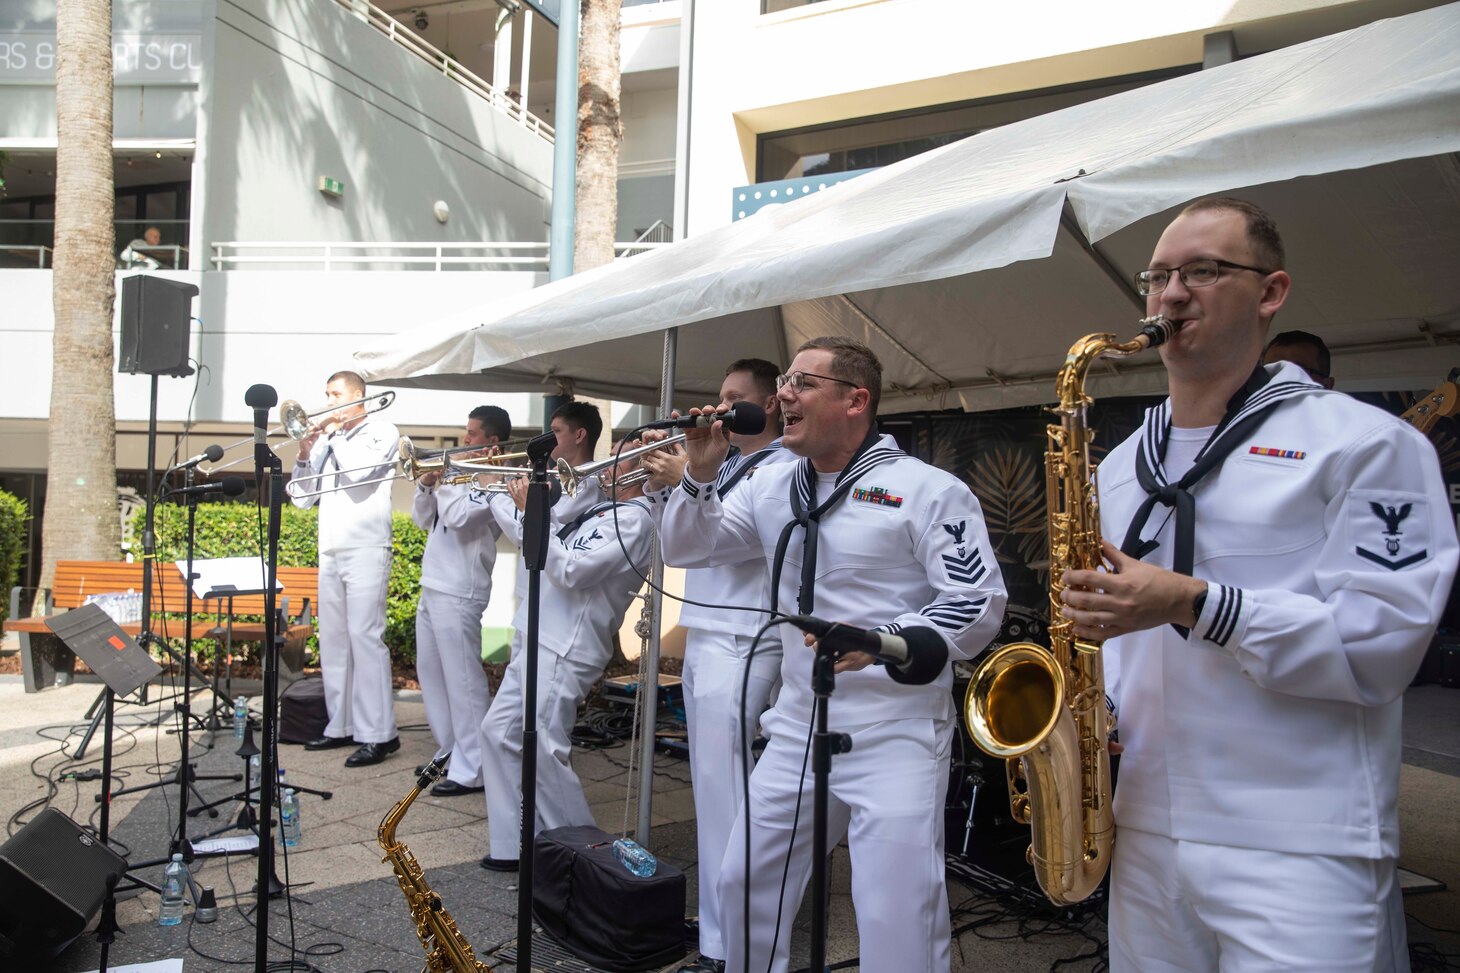 220508-N-VD554-1138 SURFERS PARADISE, Australia (May 8, 2022) – Members of the U.S. 7th Fleet Band perform at Cavil Avenue Park in Surfers Paradise, Australia. Under Commander, U.S. Pacific Fleet, 7th Fleet is the U.S. Navy's largest forward-deployed numbered fleet, and routinely interacts and operates with 35 maritime nations in preserving a free and open Indo-Pacific region. (U.S. Navy photo by Mass Communication Specialist 2nd Class Aron Montano)